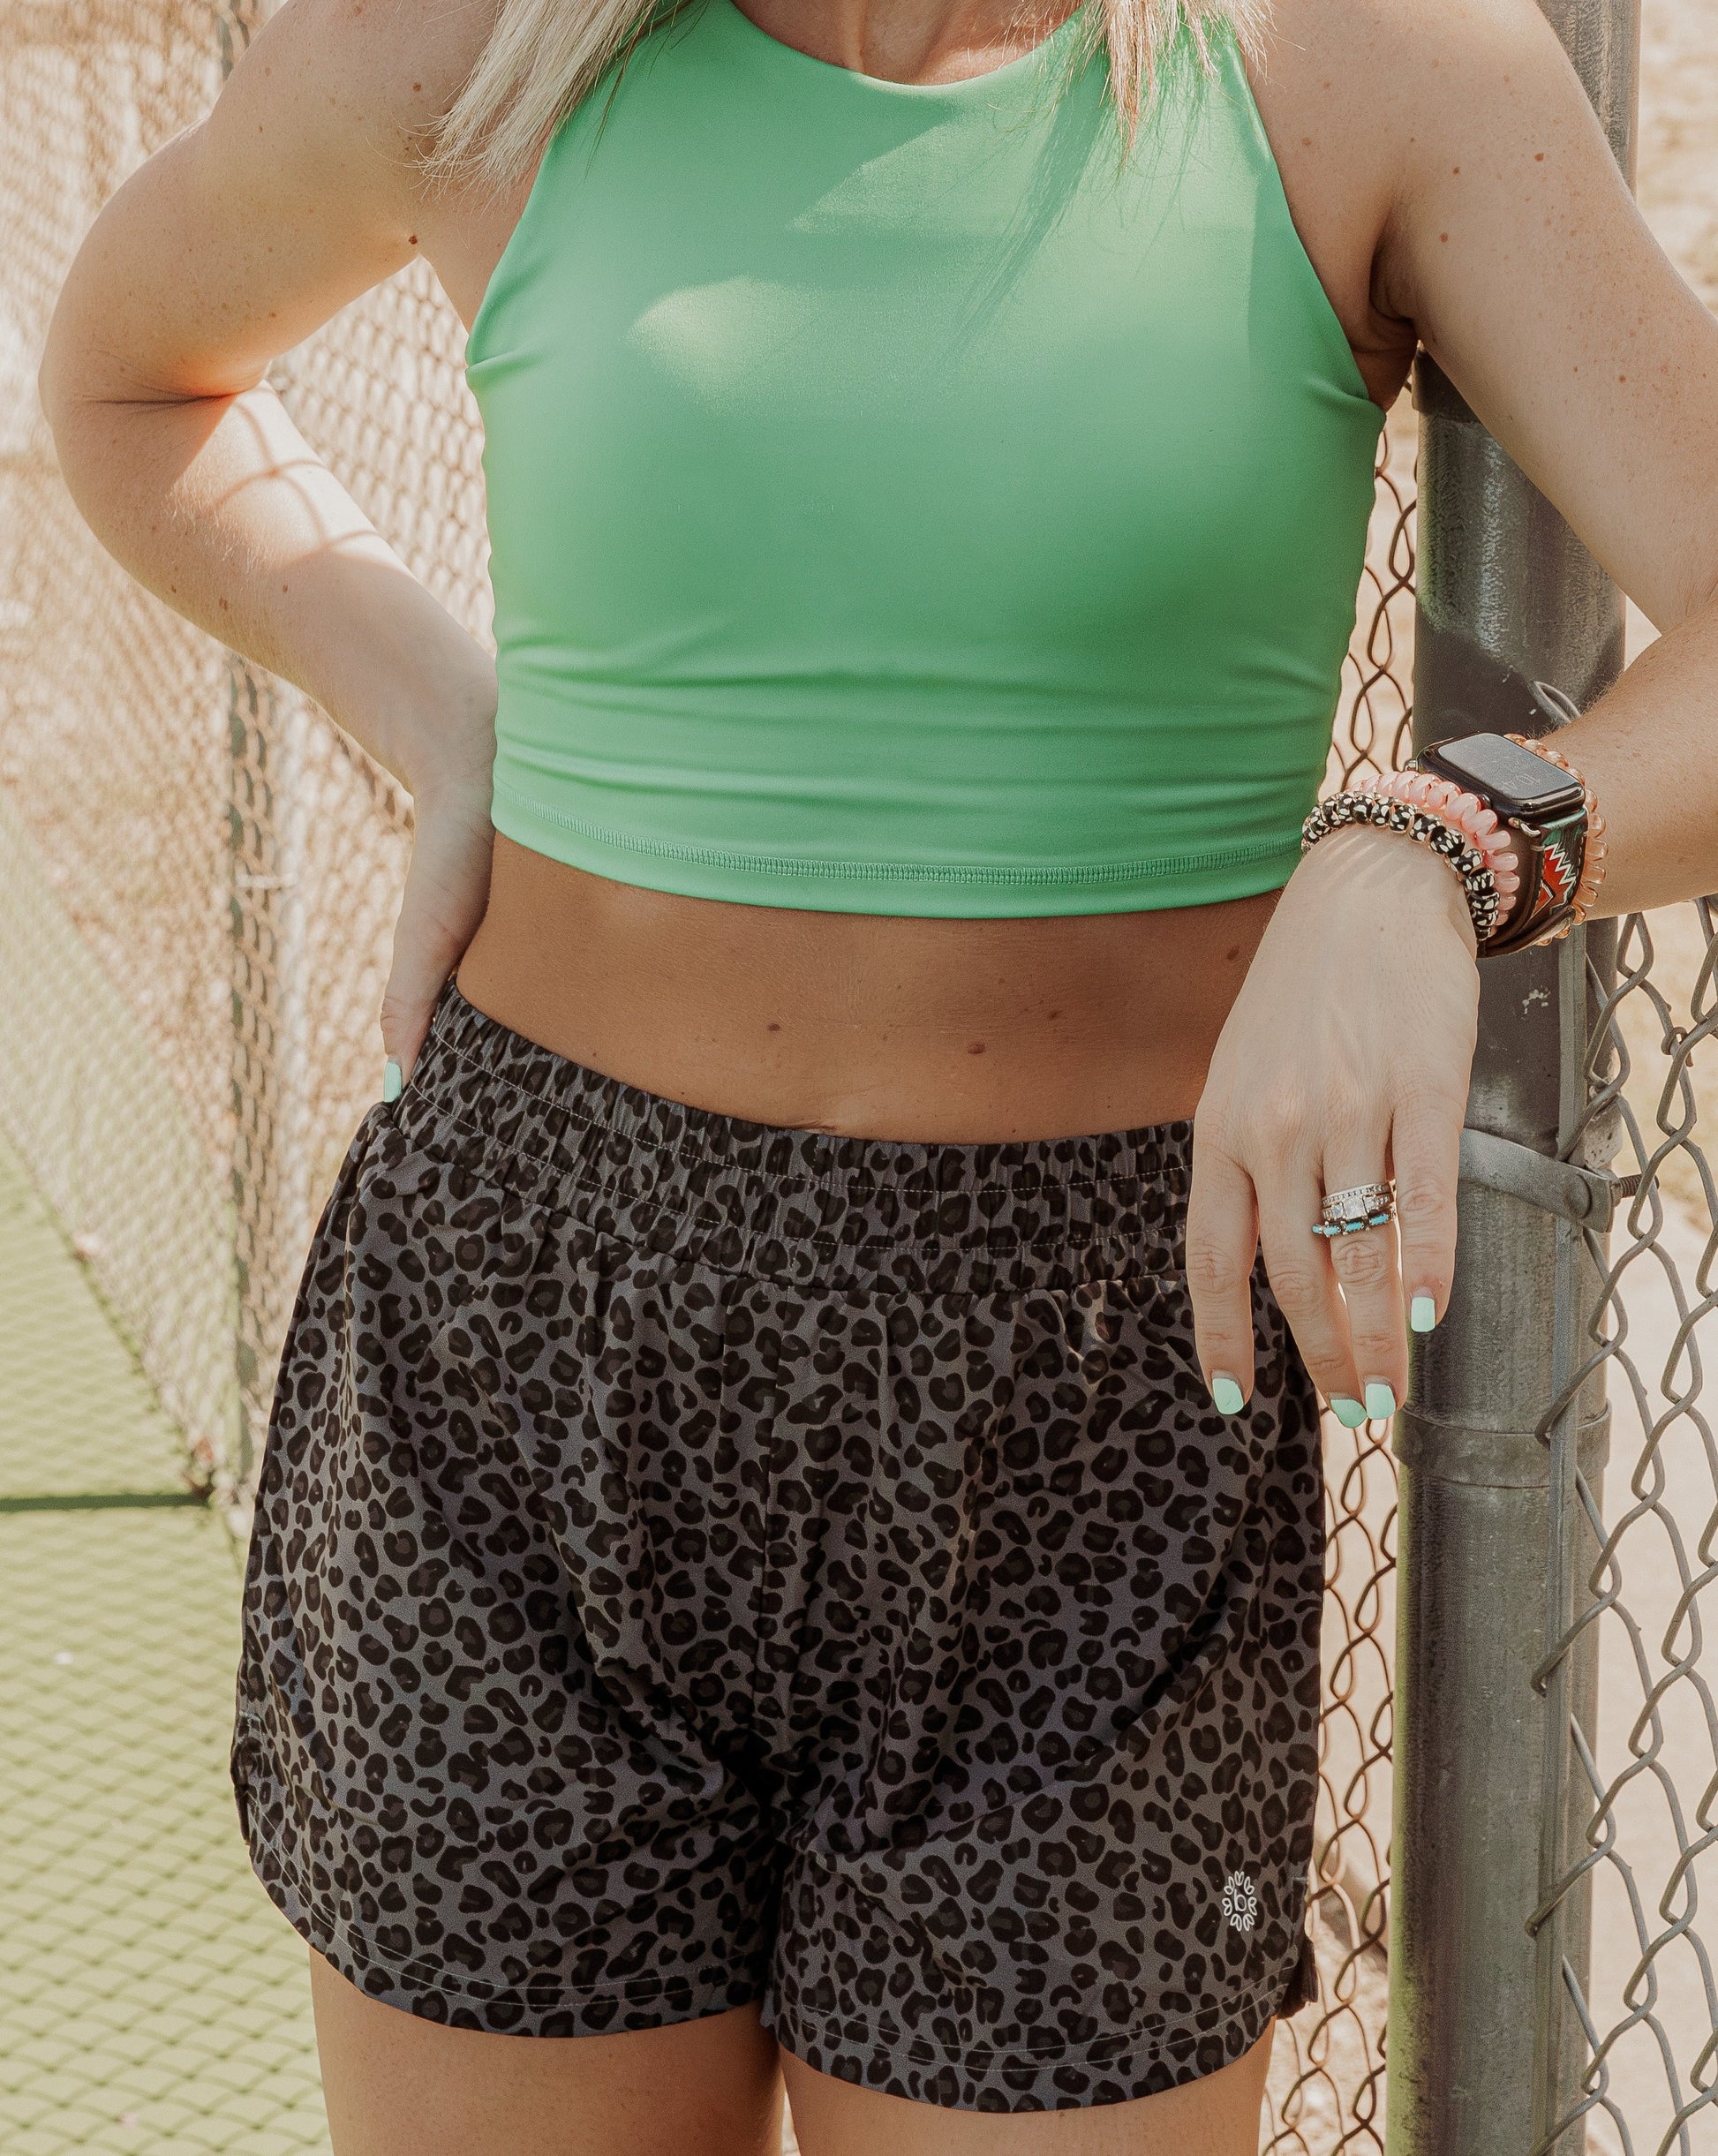 Blonde haired women standing on a tennis court next to the fence. She is wearing a bright green long lined tank top and high waisted grey leopard running shorts. This photo does not include her face but the middle half of her body.